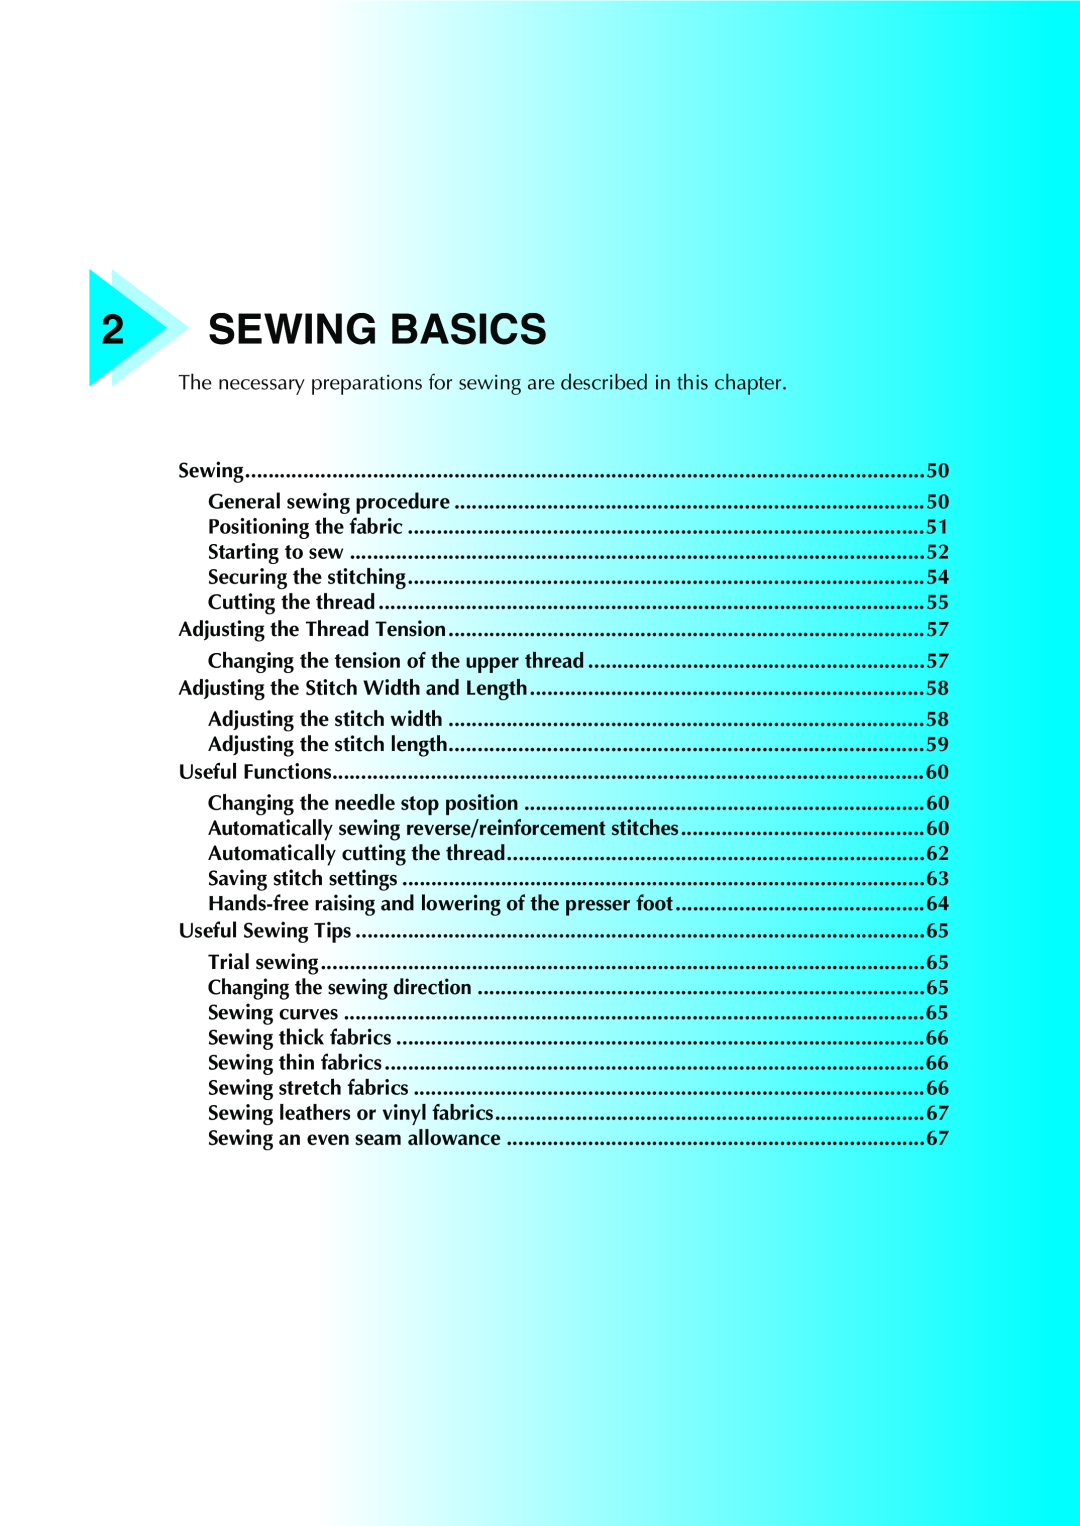 Brother NX-450, N5V operation manual Sewing Basics, The necessary preparations for sewing are described in this chapter 